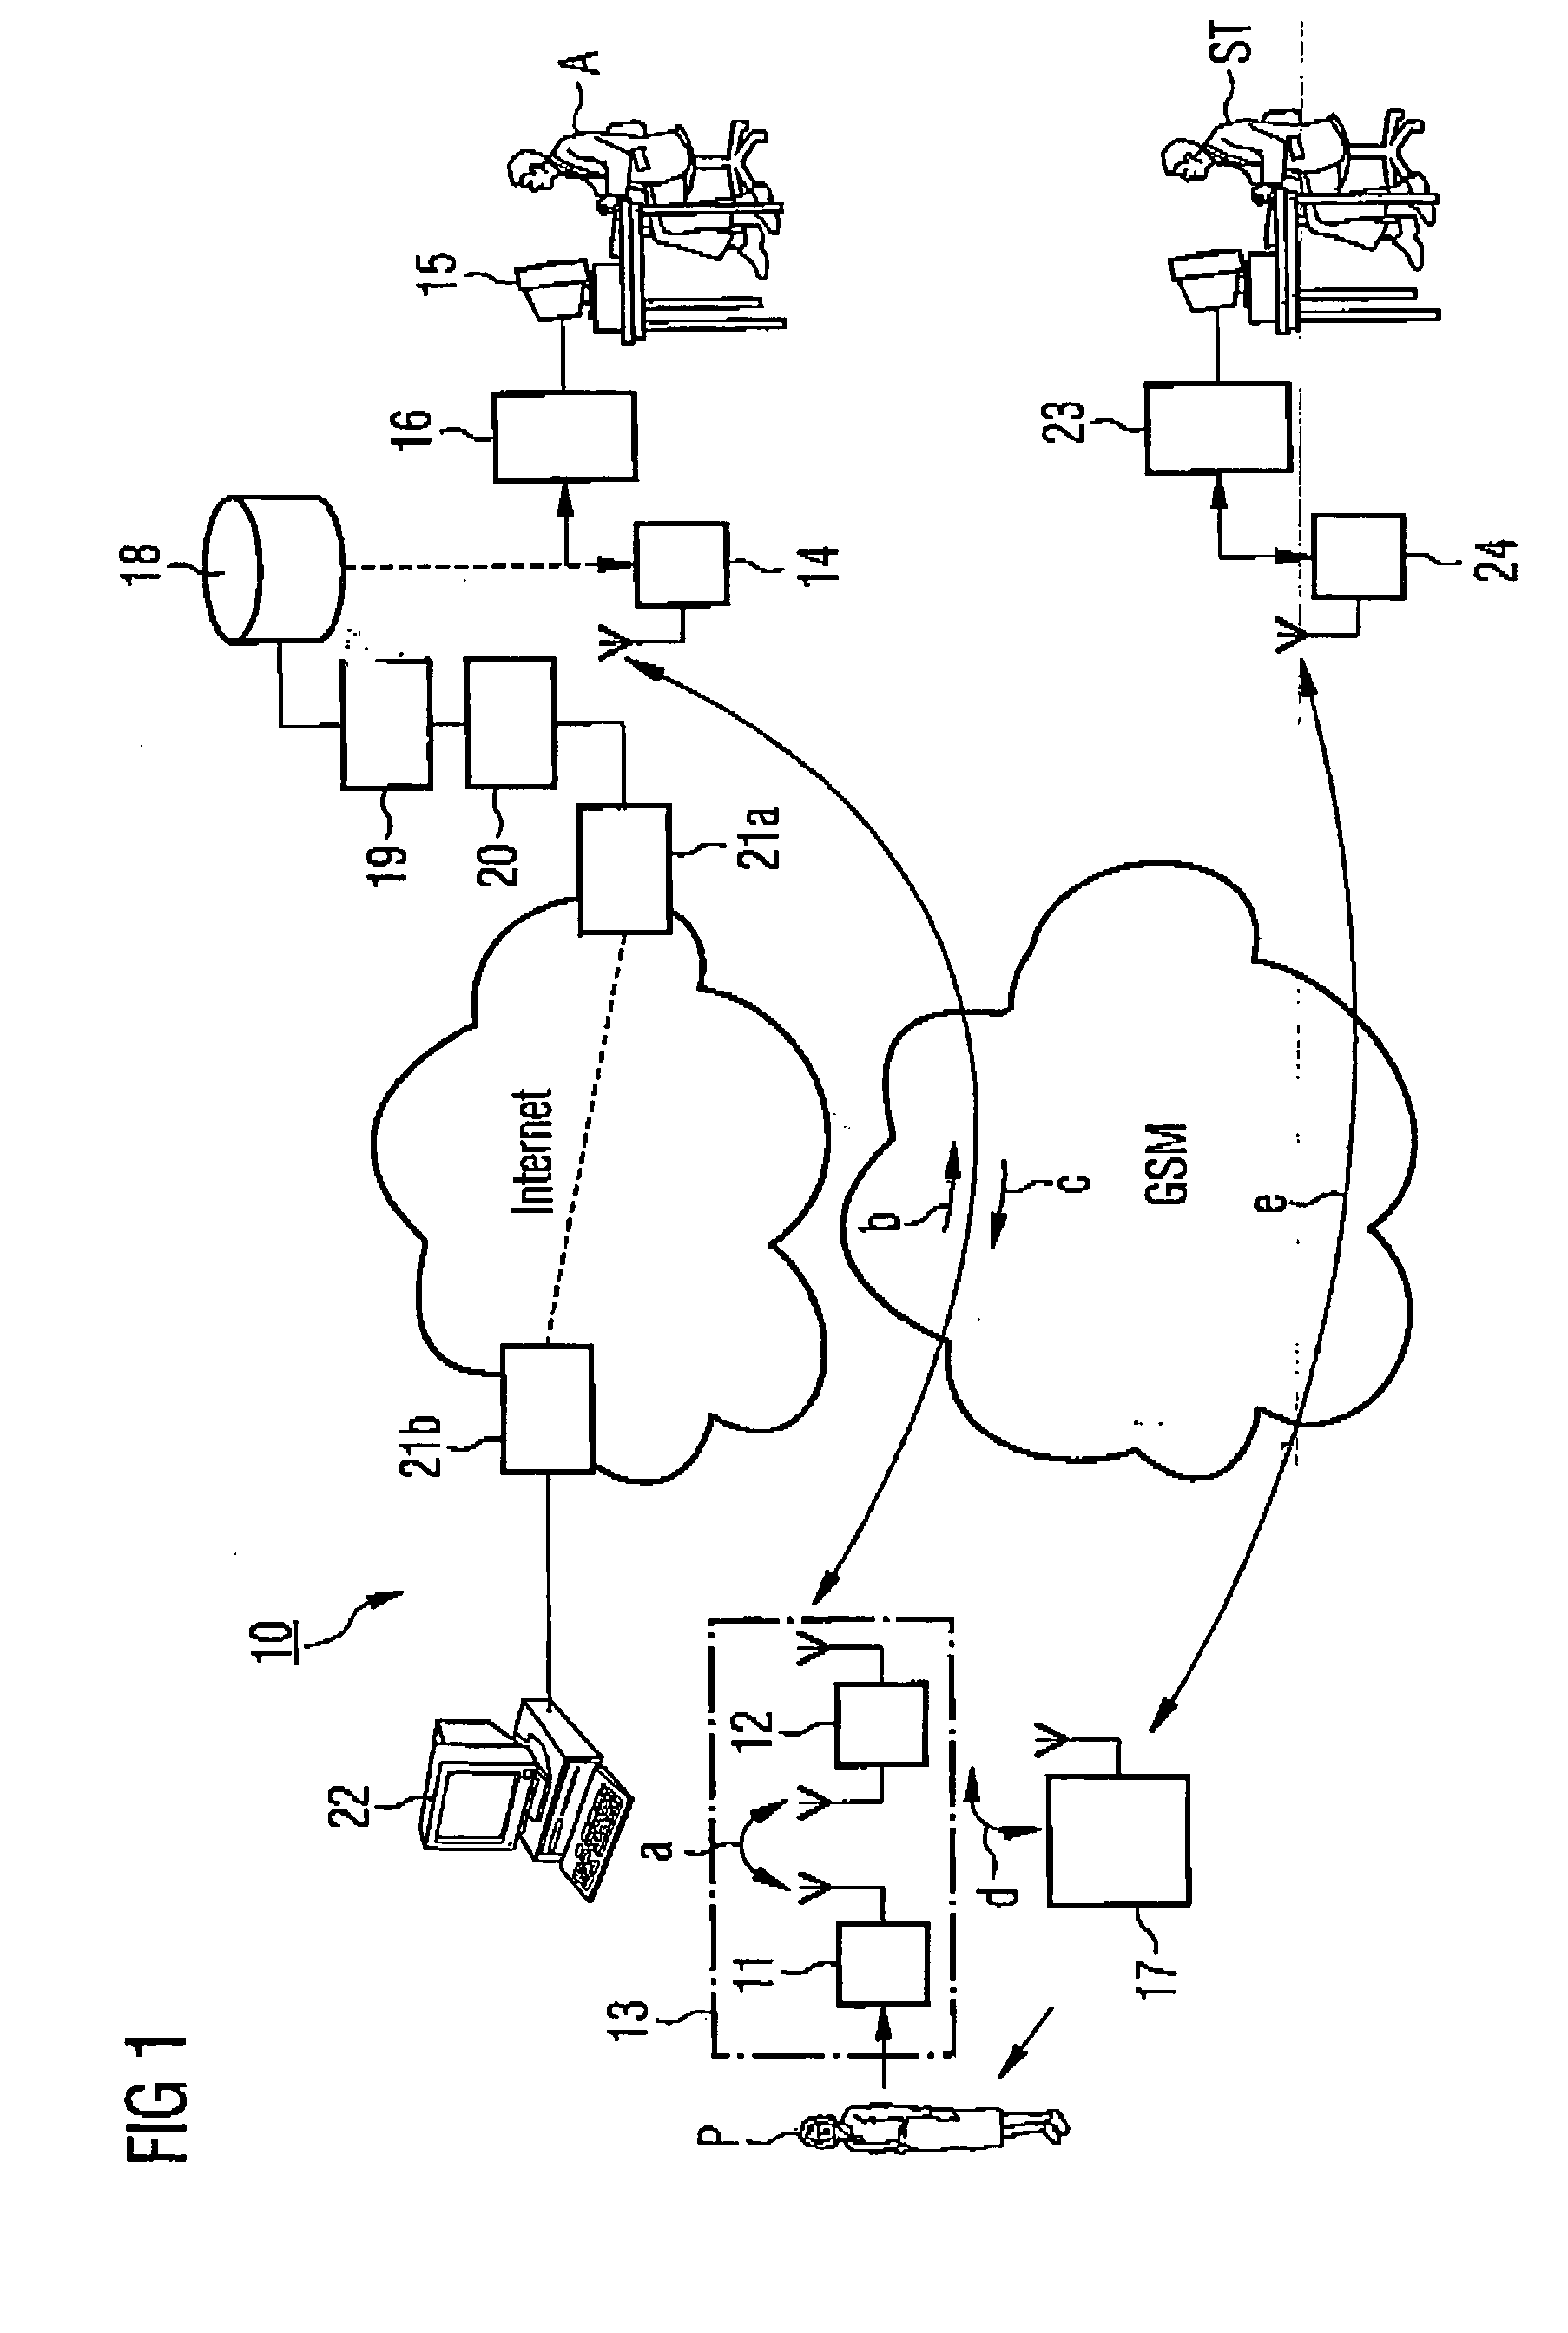 Arrangement of equipment for remote monitoring of bodily functions